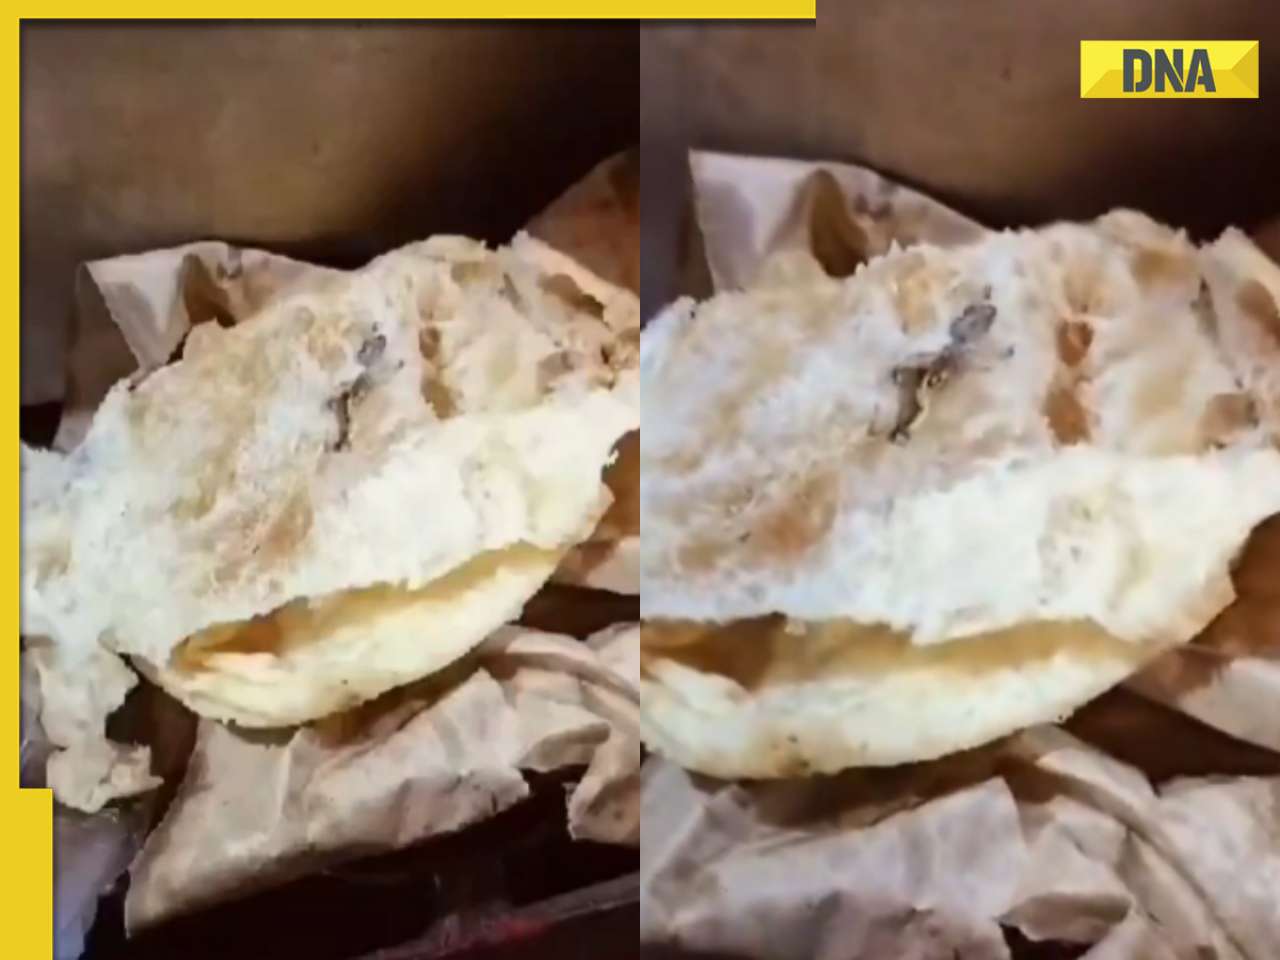 Viral video: Dead lizard found in chole bhature at Delhi's Jahangirpuri sparks outcry for street food ban